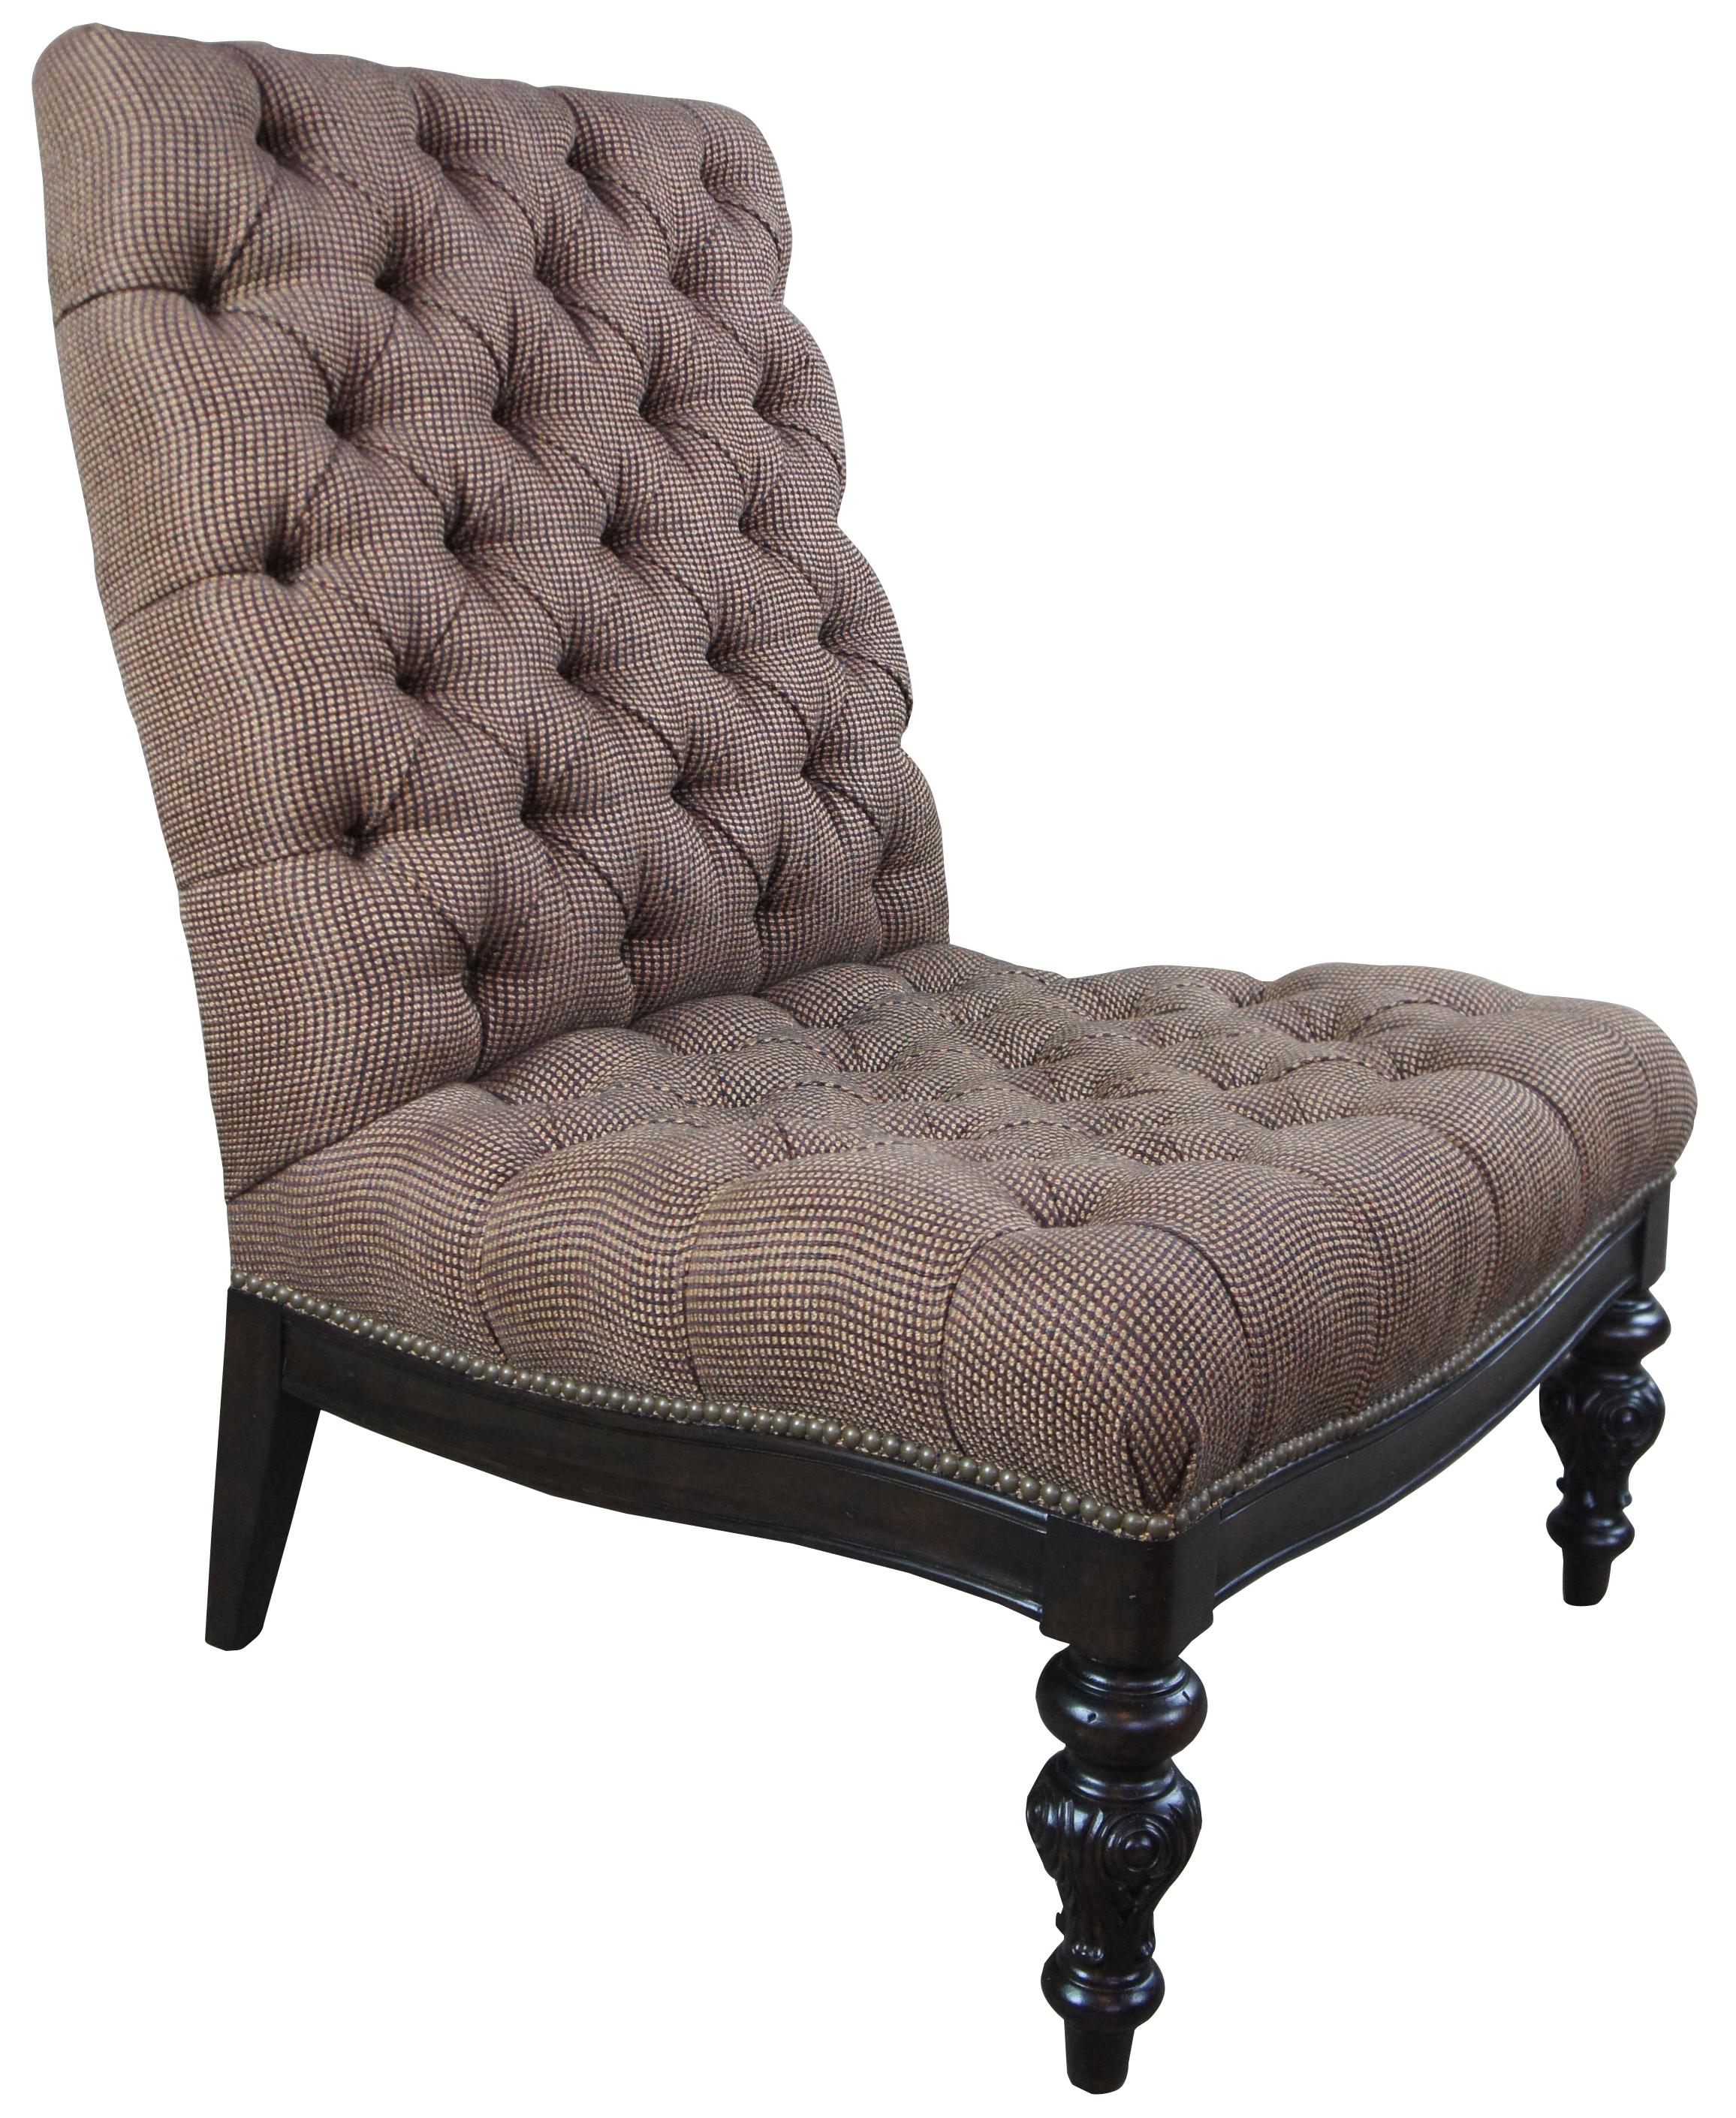 French Provincial Henredon French Tufted Tweed and Nailhead Slipper Java Lounge Chair and Ottoman